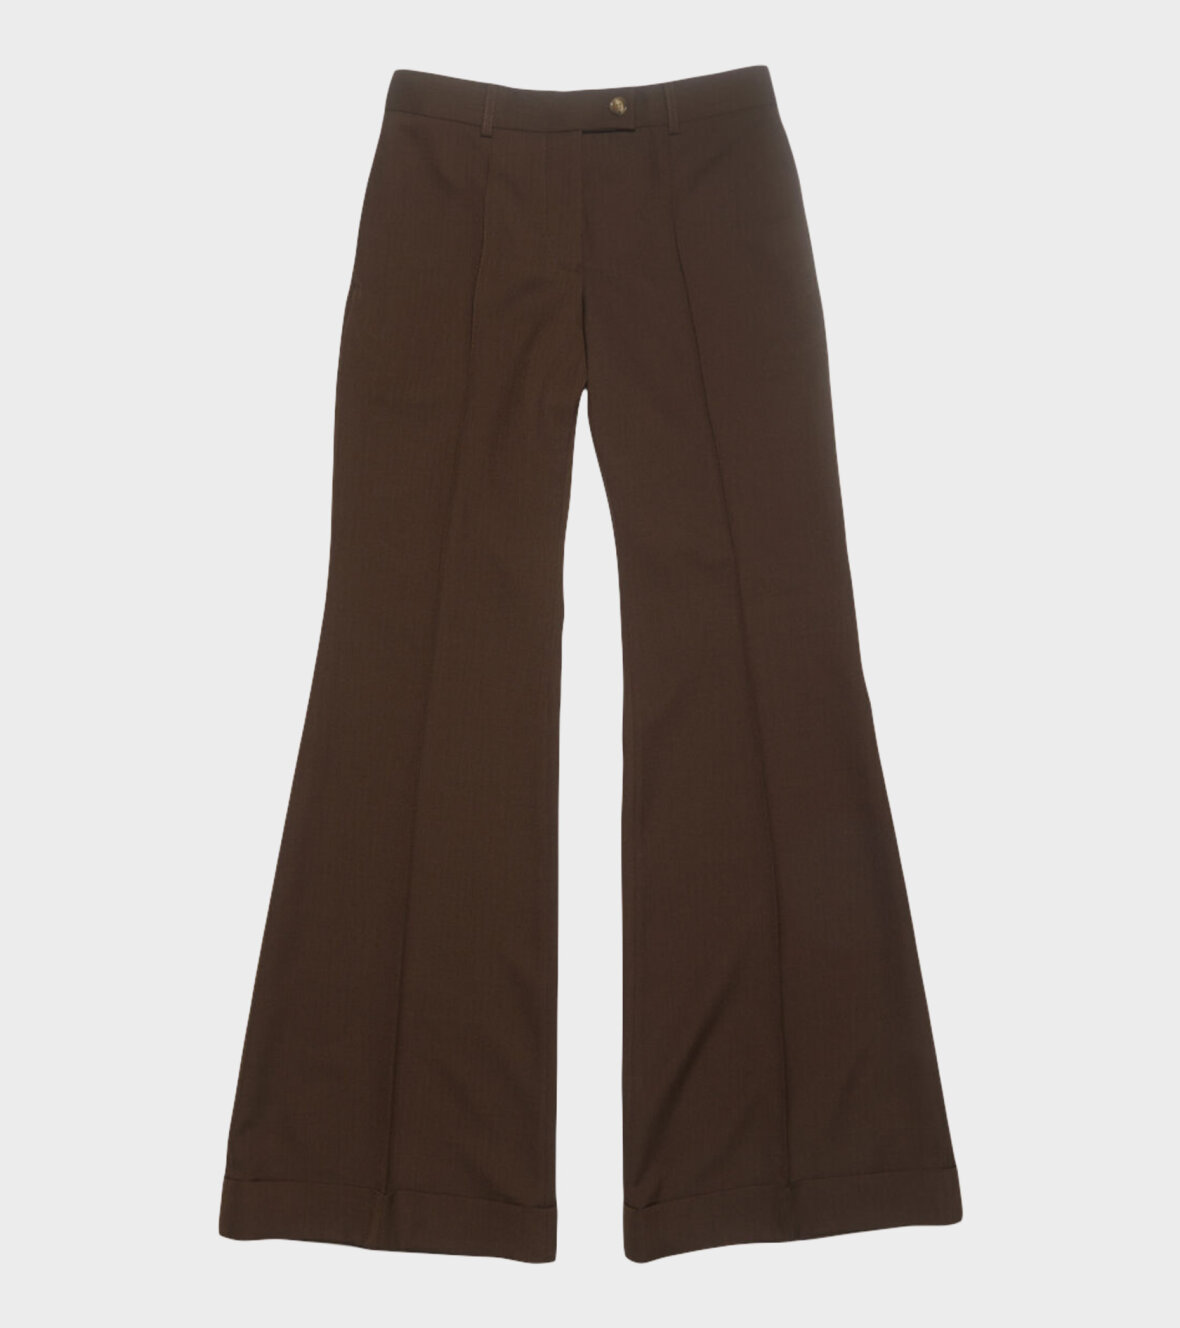 dr. Adams - Acne Studios Tailored Flared Trousers Chestnut Brown